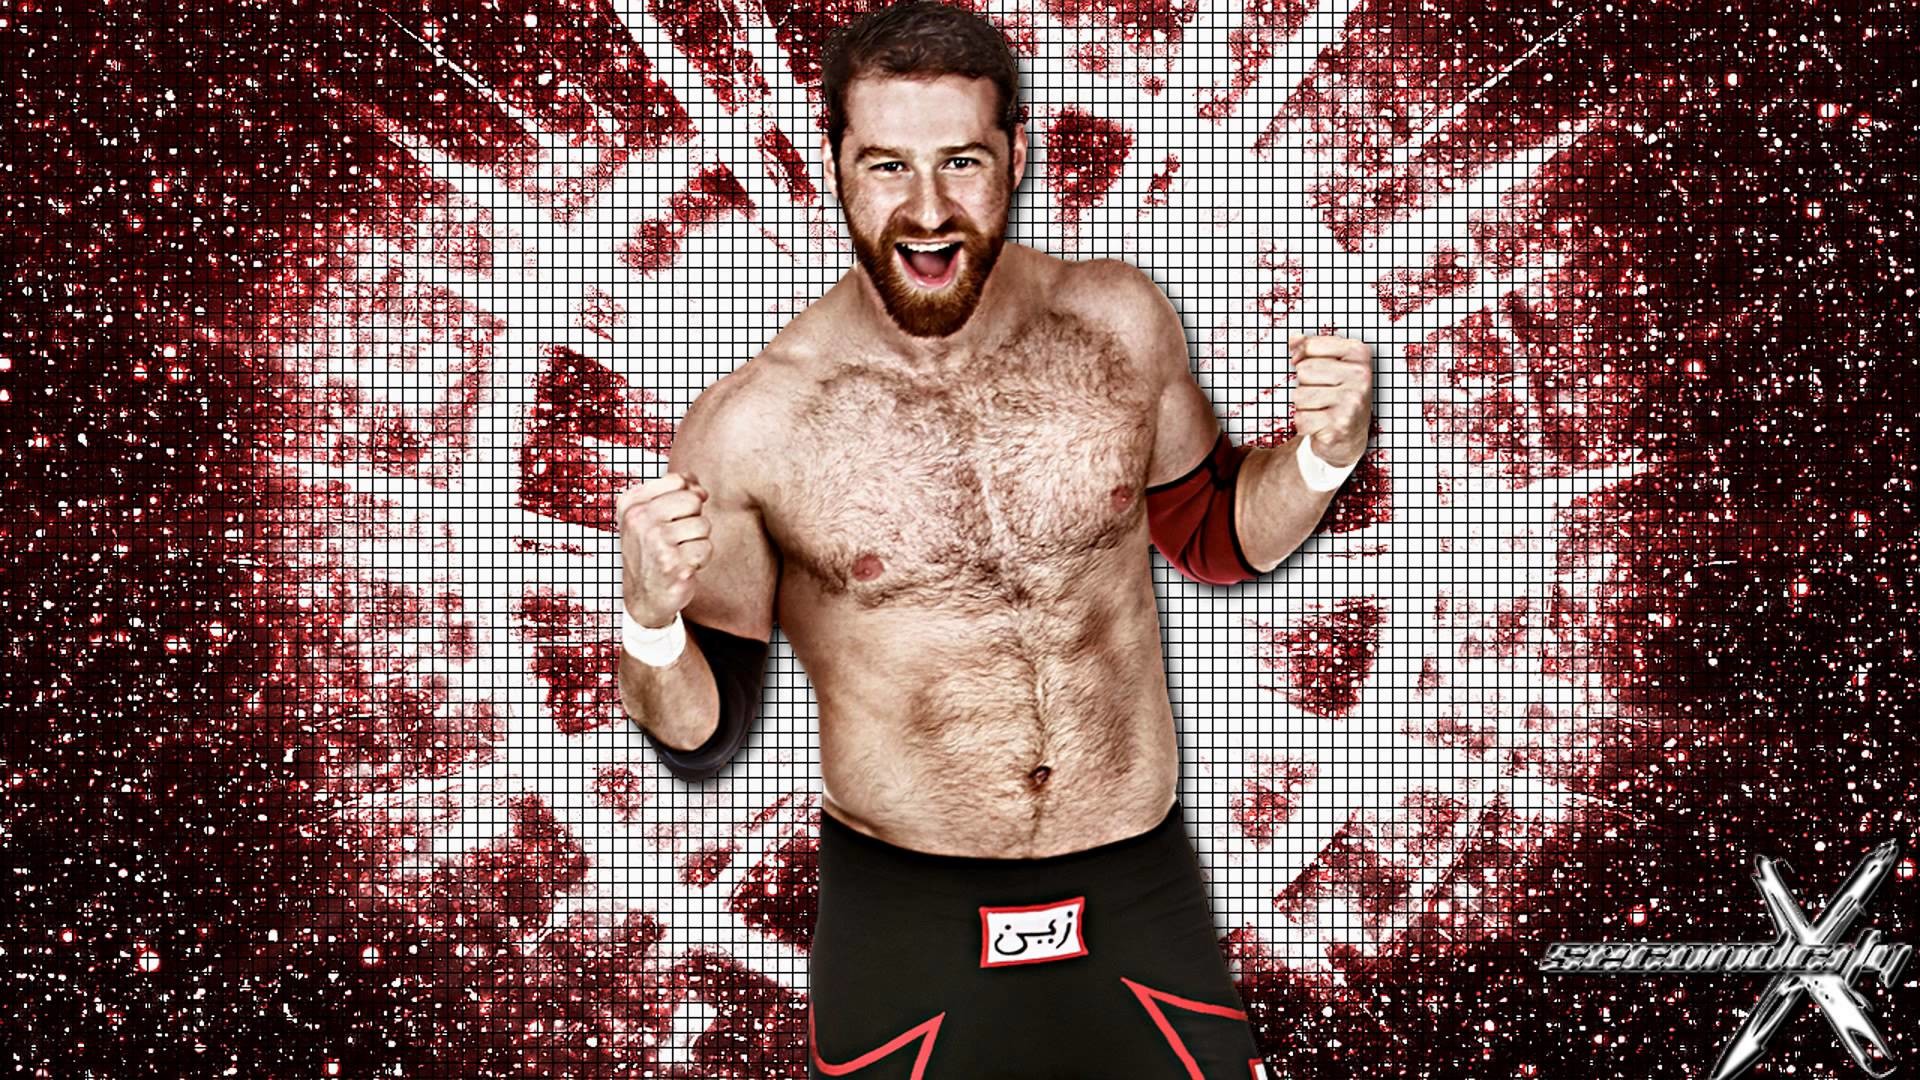 1920x1080 wwe superstars images Sami Zayn HD wallpaper and background photos